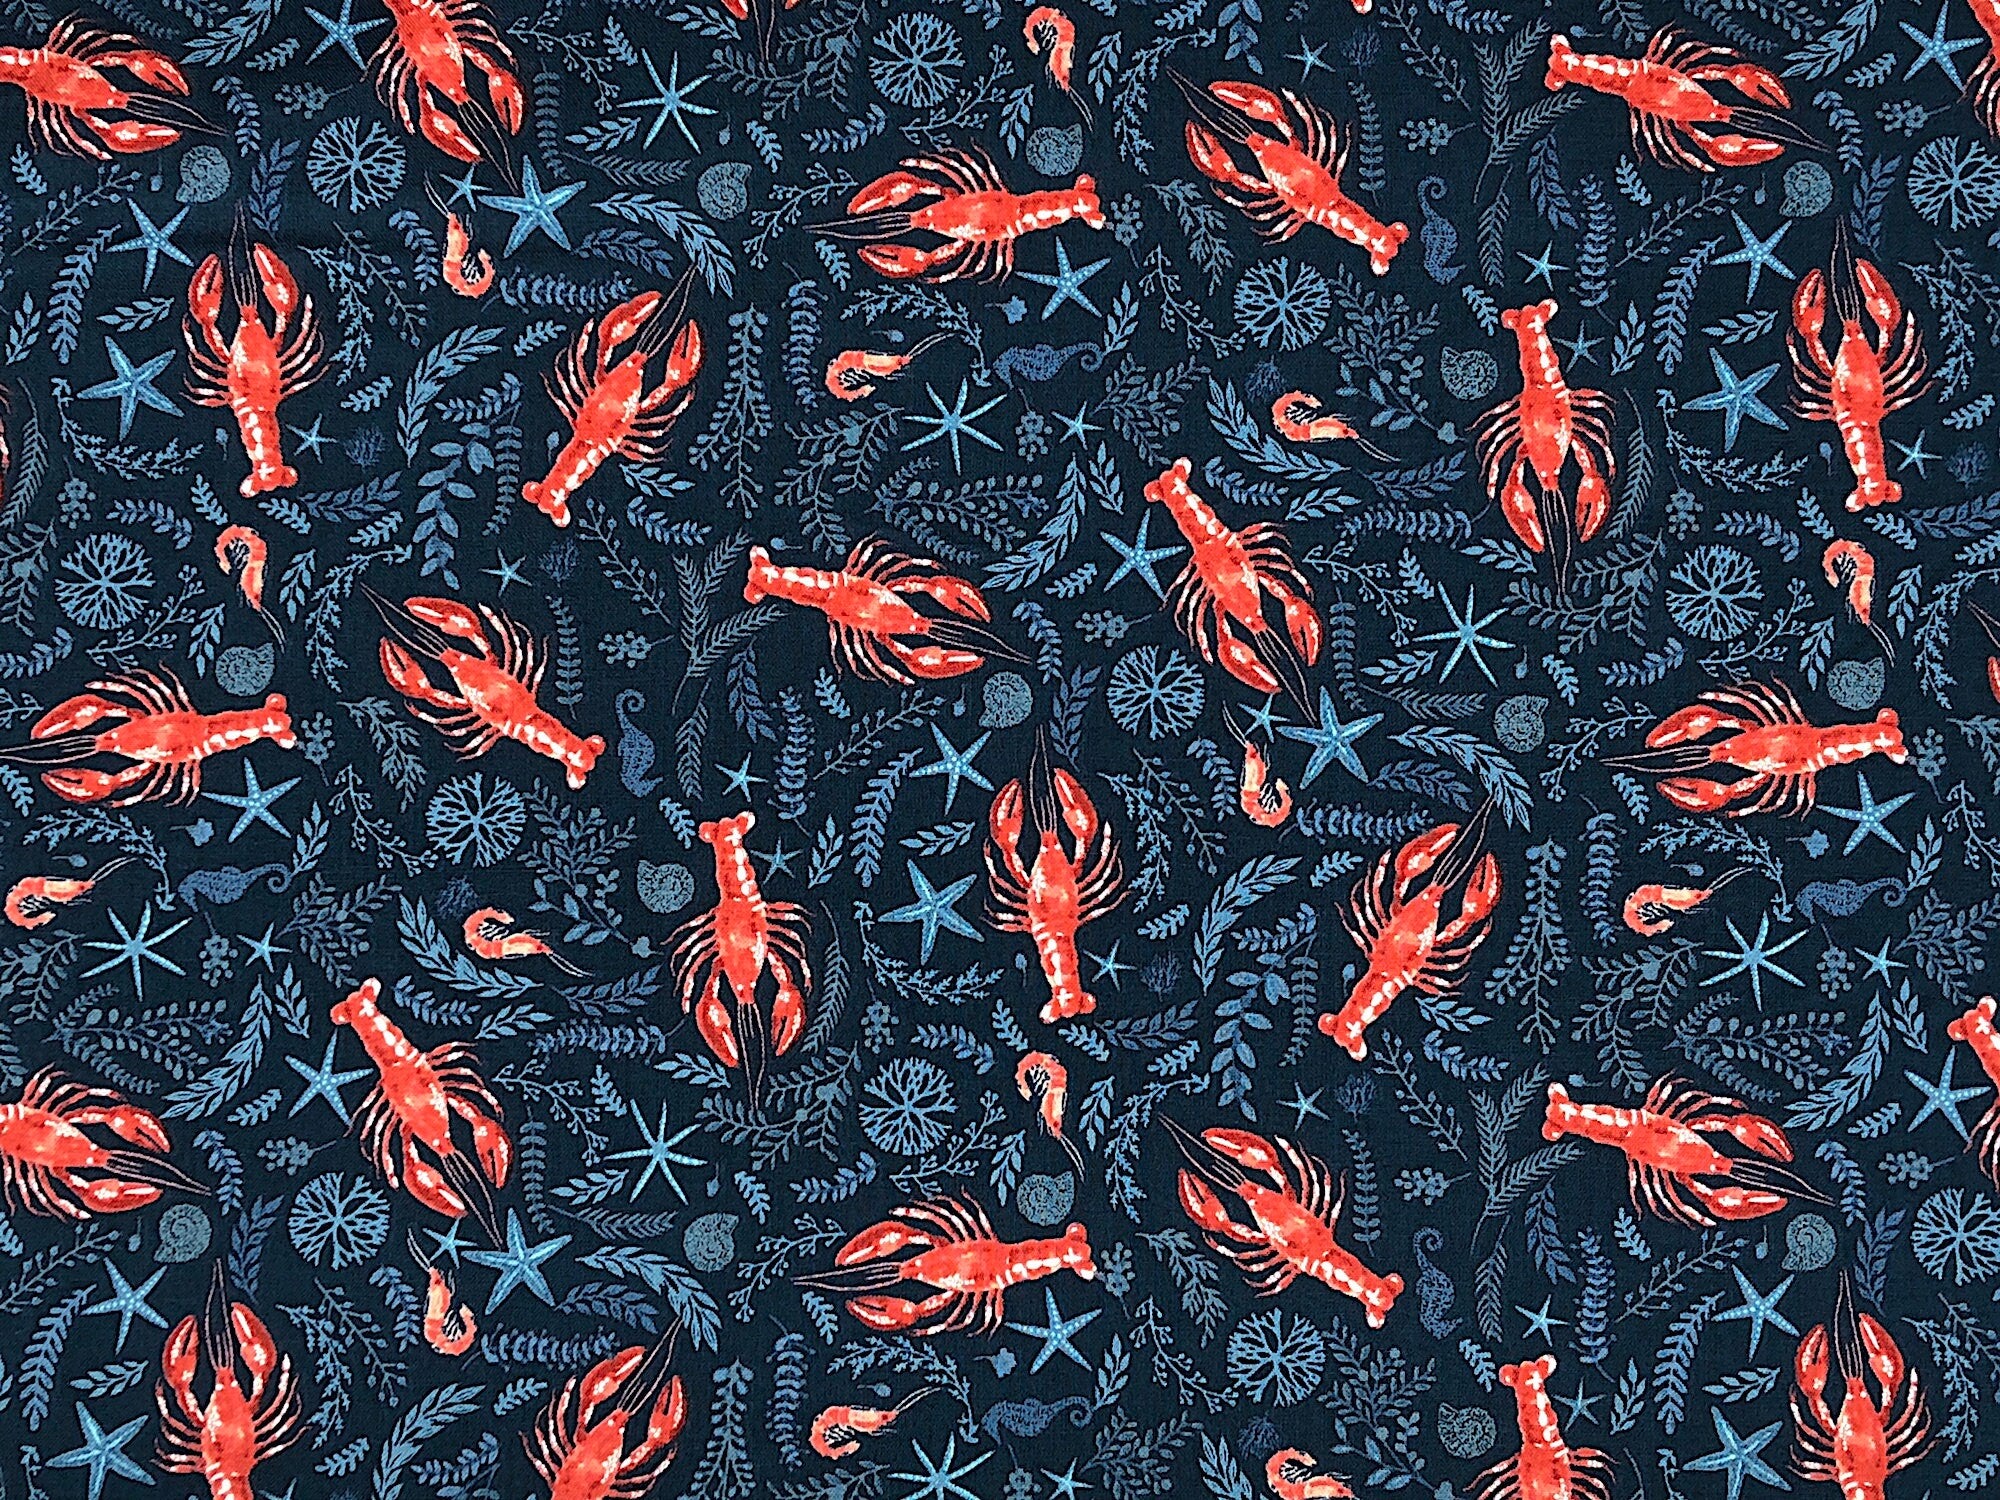 This fabric is called Oxford Lobster. This blue fabric is covered with red lobsters and plants.